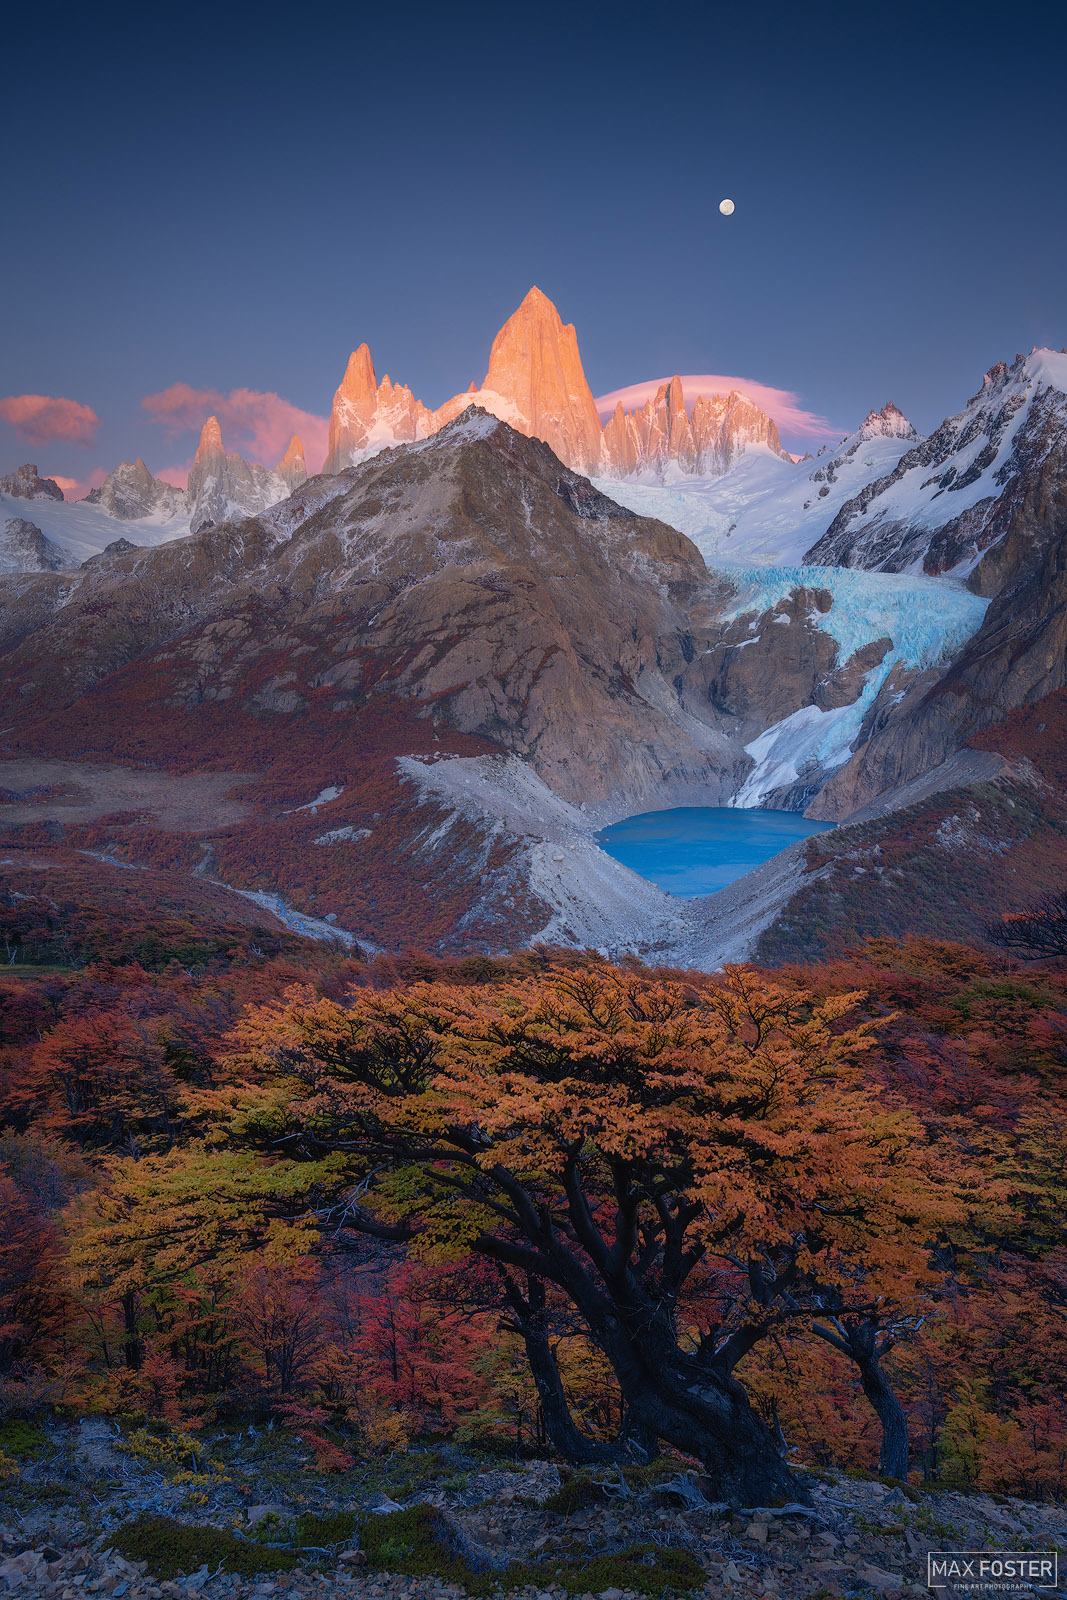 Adorn your walls with Polychrome Perspective, Max Foster's limited edition photographic print of Mount Fitz Roy in Los Glaciares...